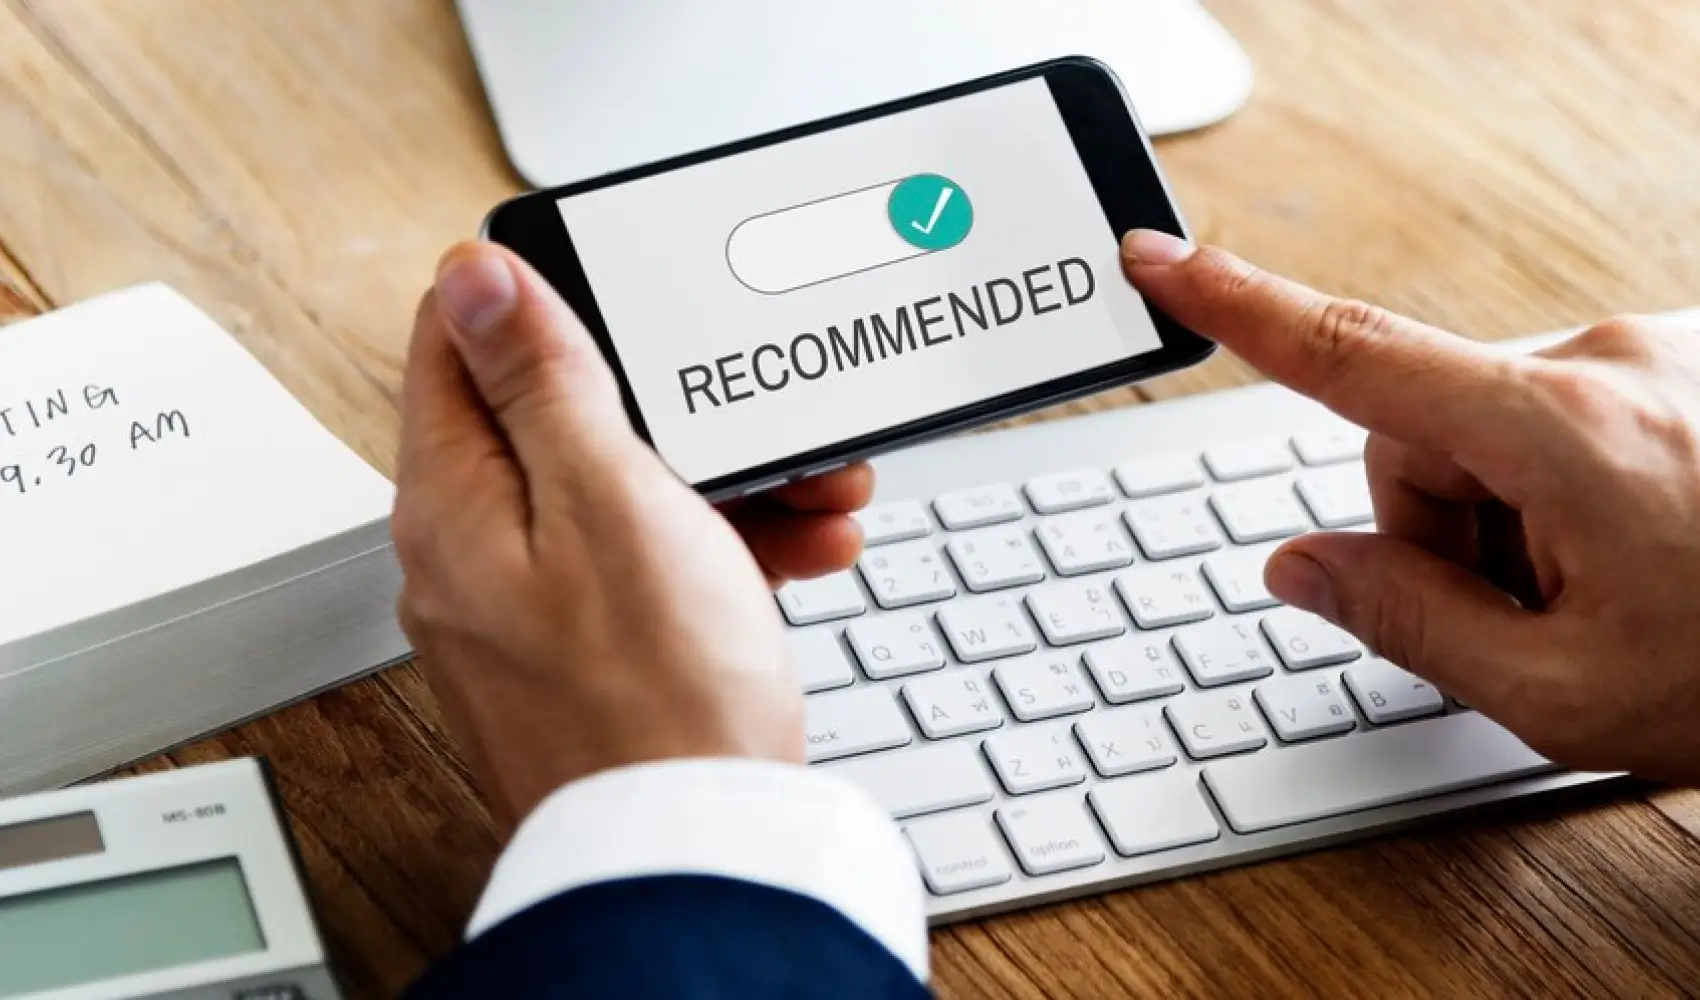 How to Write a Recommendation on LinkedIn